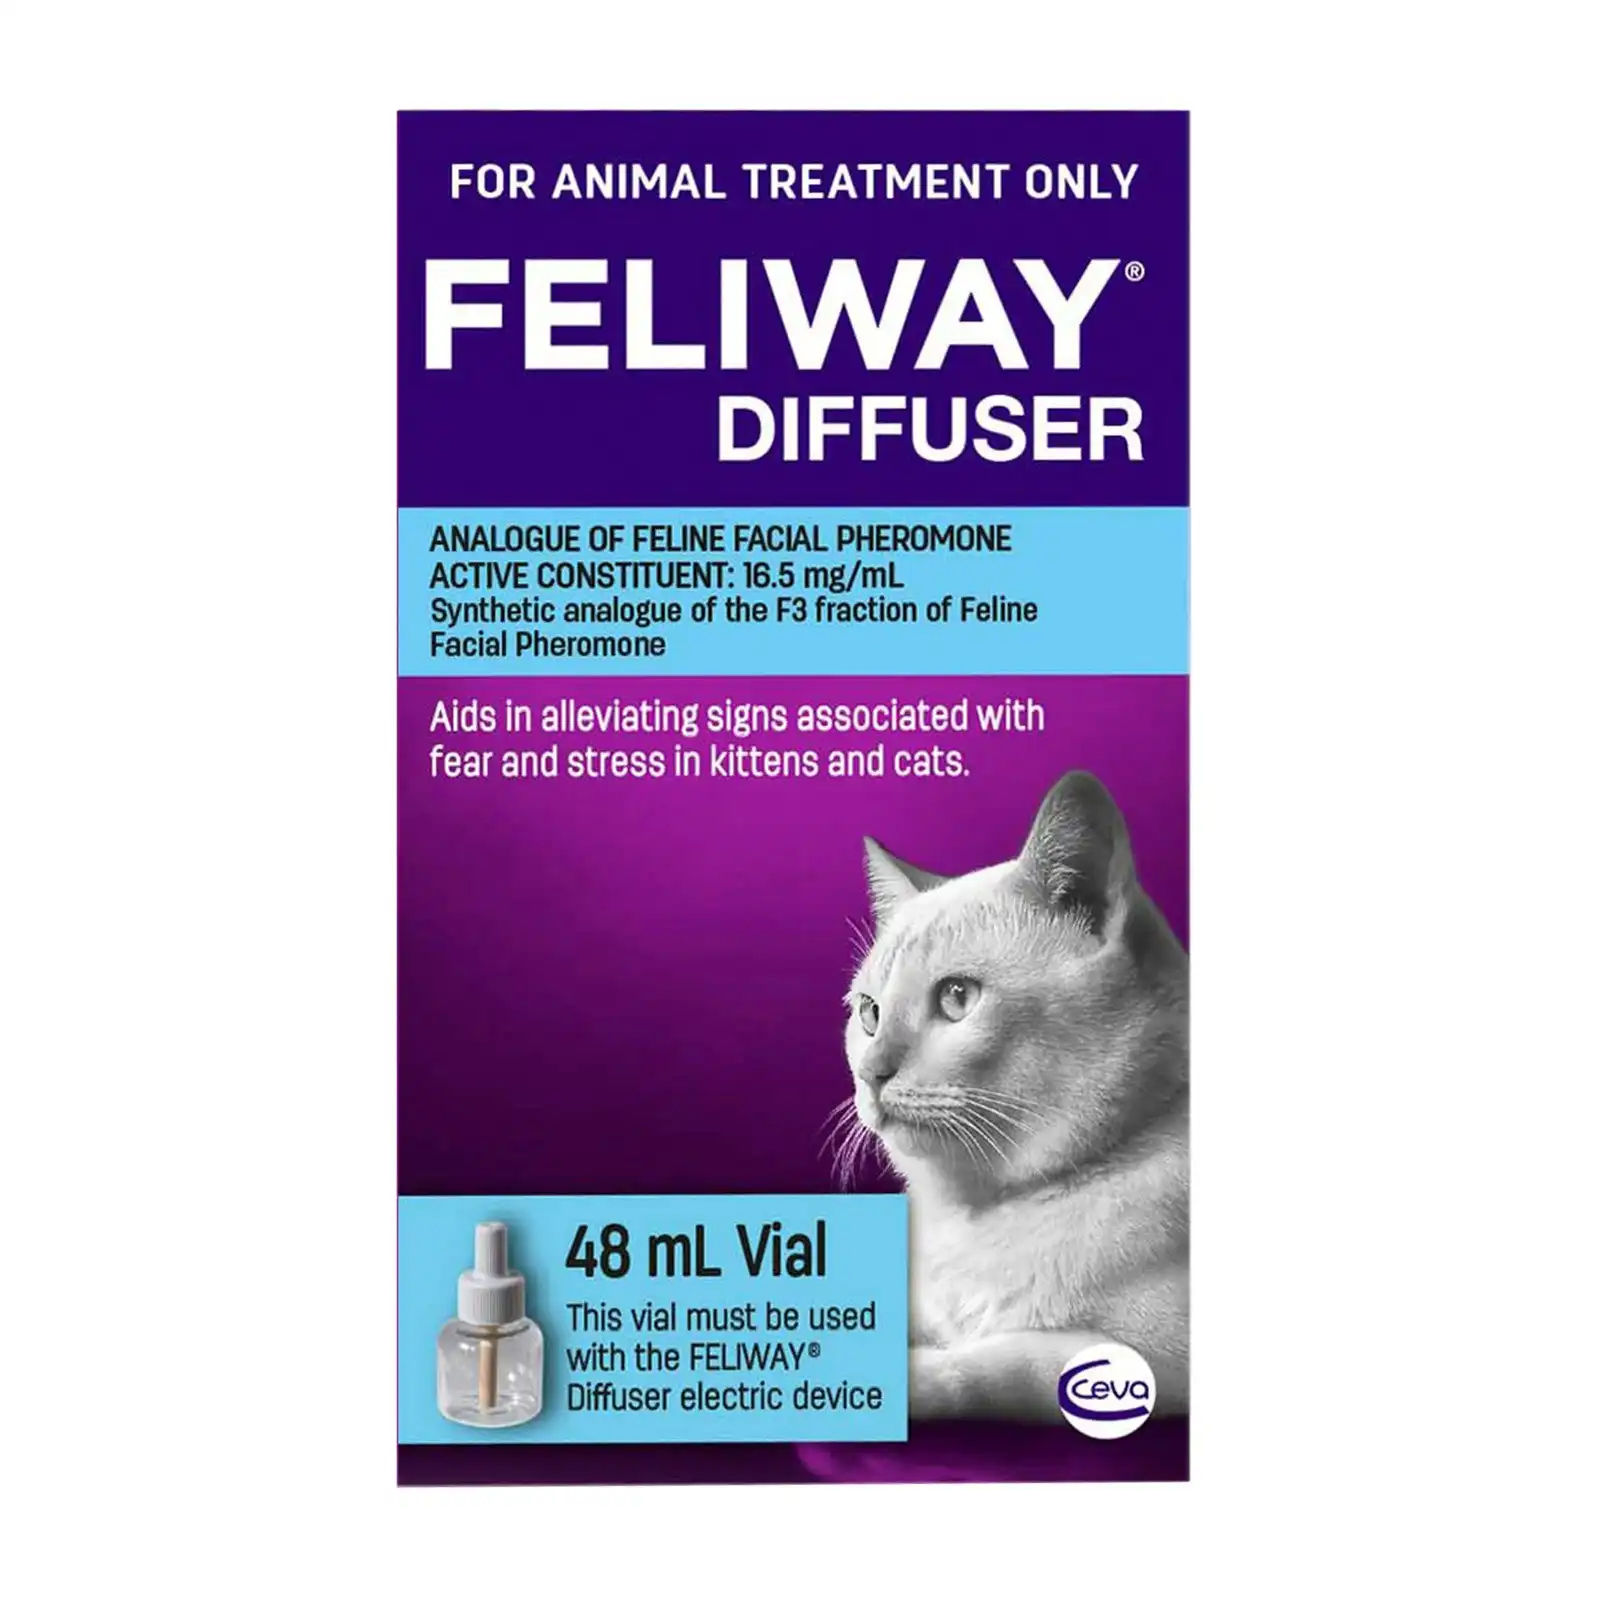 FELIWAY Refill ONLY for Kittens and Cats 1 Pack